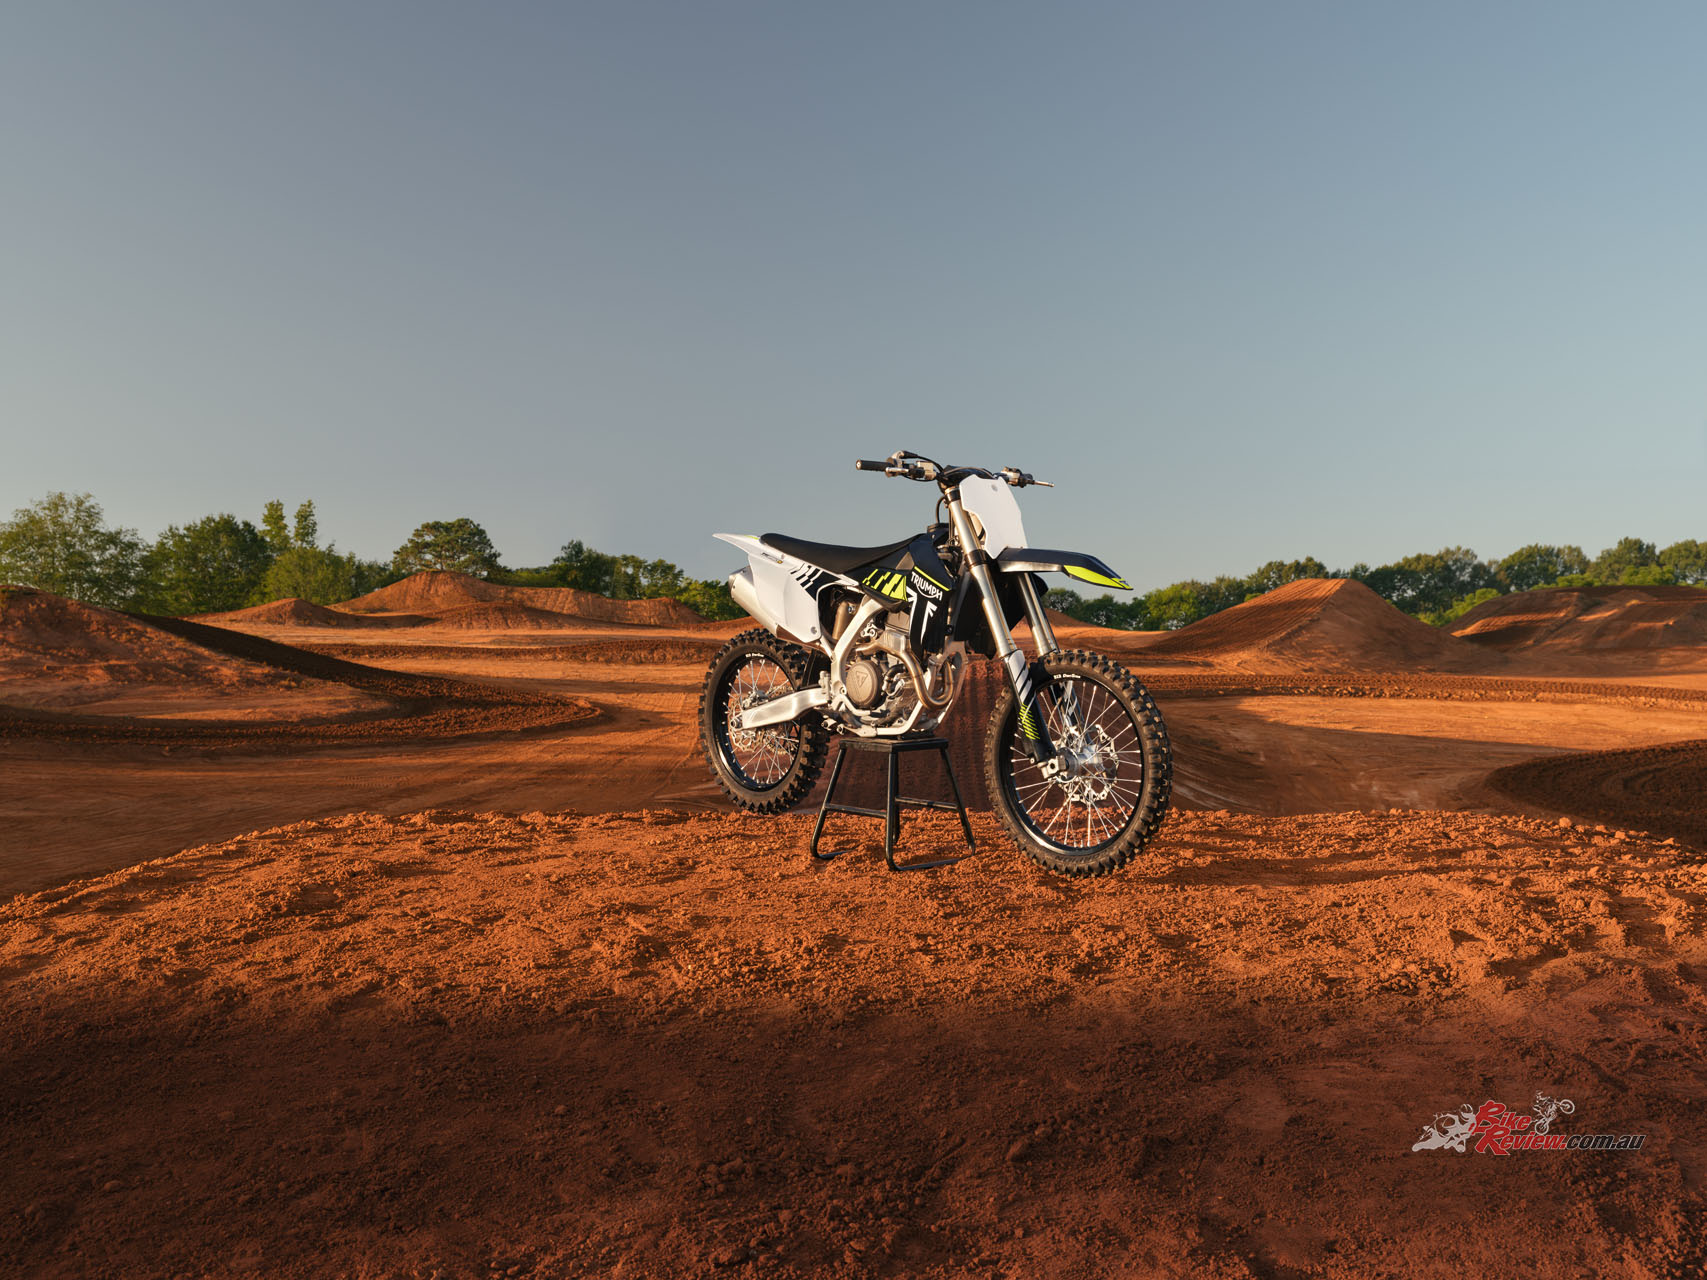 Ricky Carmichael said: “The TF 250-X is an incredible bike. This is the bike that we set out to build. When you talk about the chassis, the powertrain, the components – it’s the best of everything you could ever want.